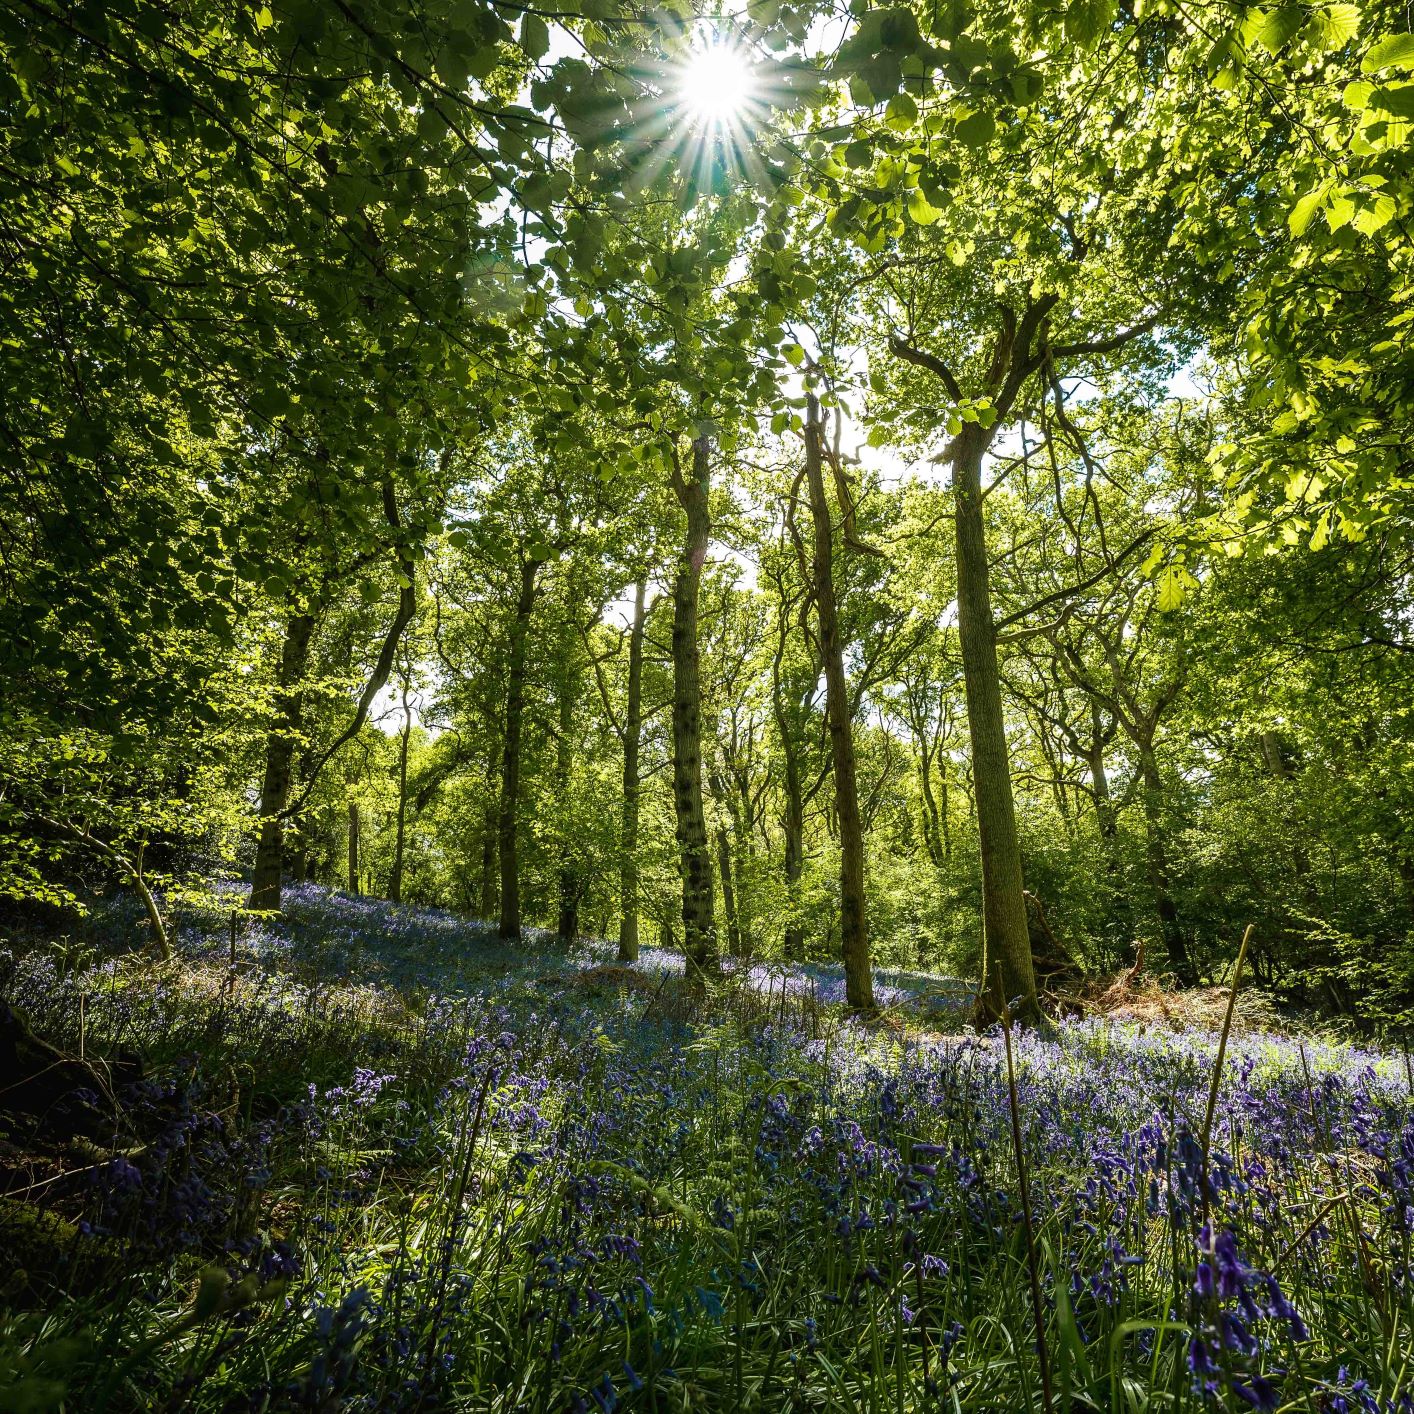 Sunlight through tall trees with bluebells on the Forest floor 